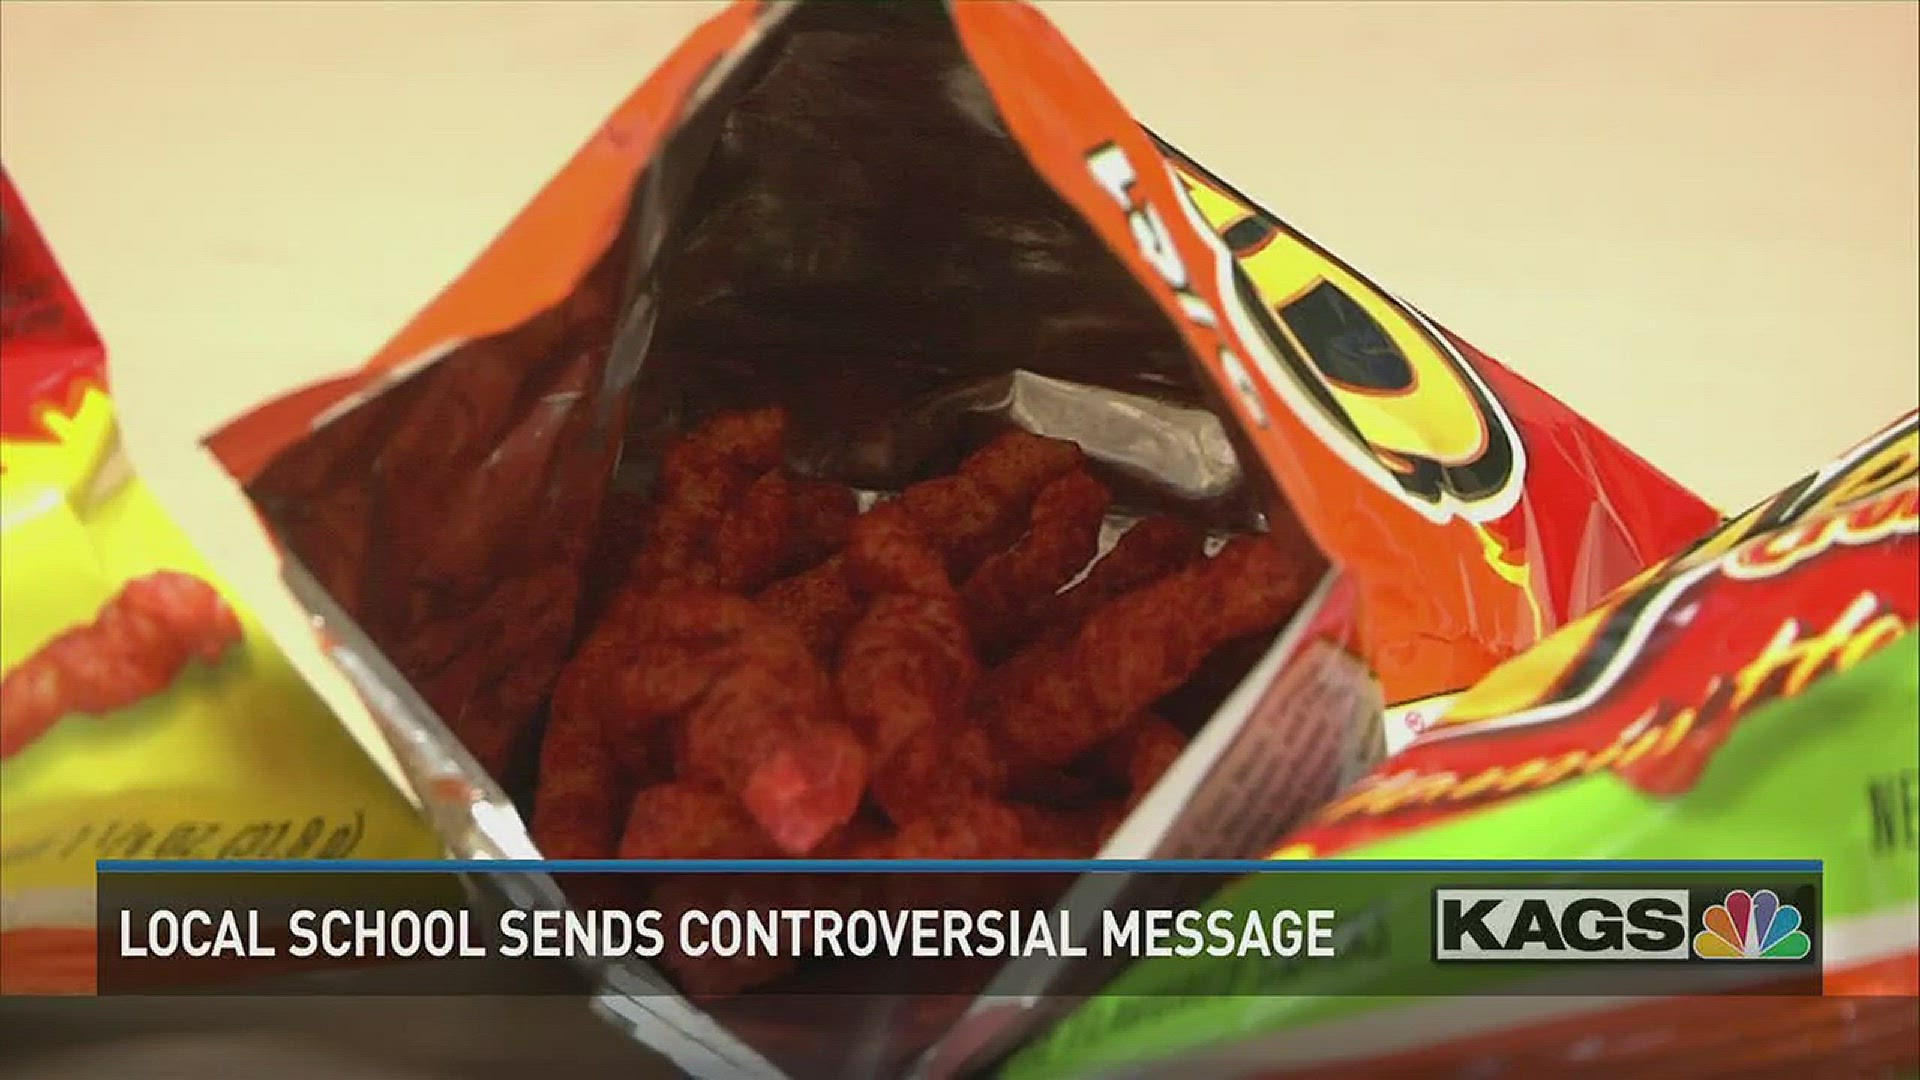 Parents were upset because students at Crockett Elementary were  offered Flamin' Hot Cheetos for attending school on "A day without Immigrants".